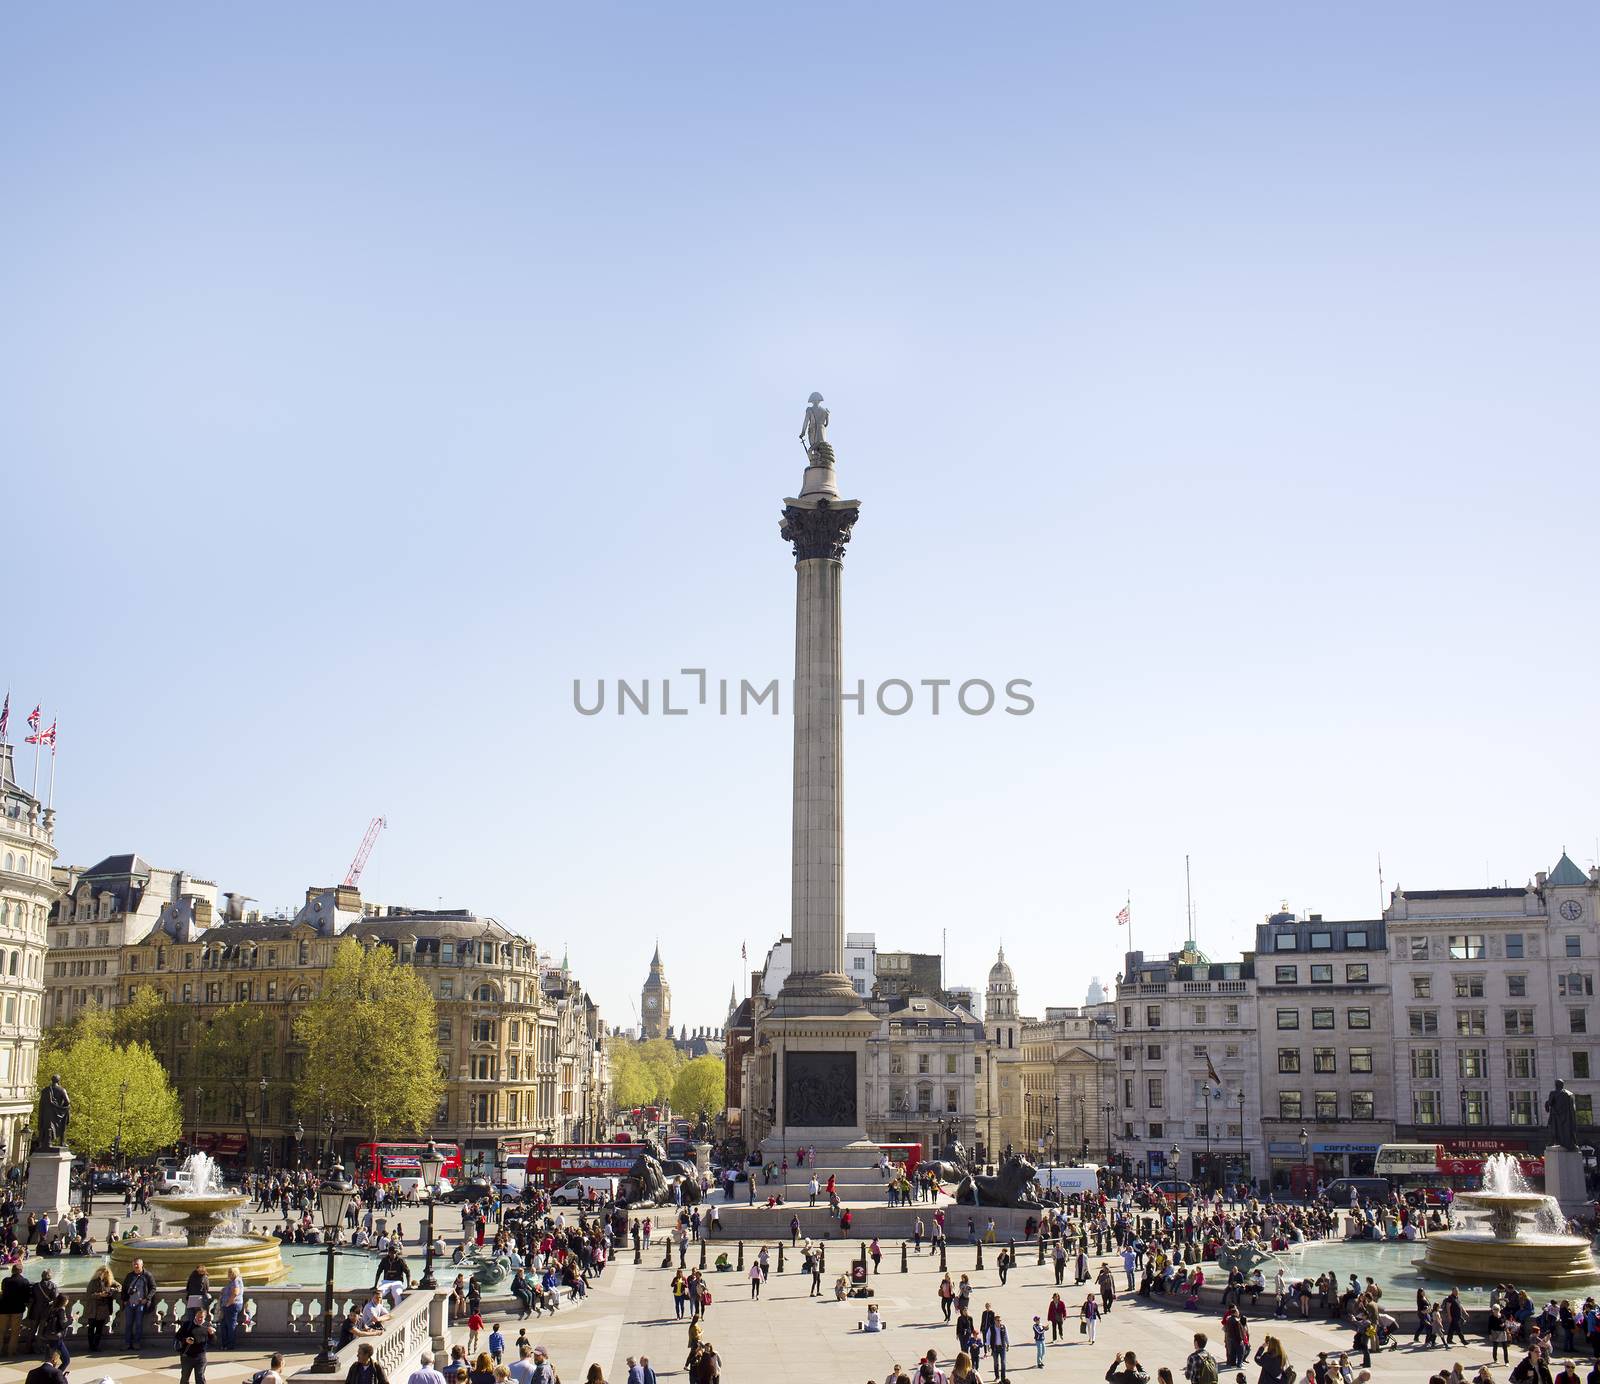 LONDON, UK - APRIL 16, 2014: Trafalgar Square is a public space and tourist attraction in central London, built around the area formerly known as Charing Cross.